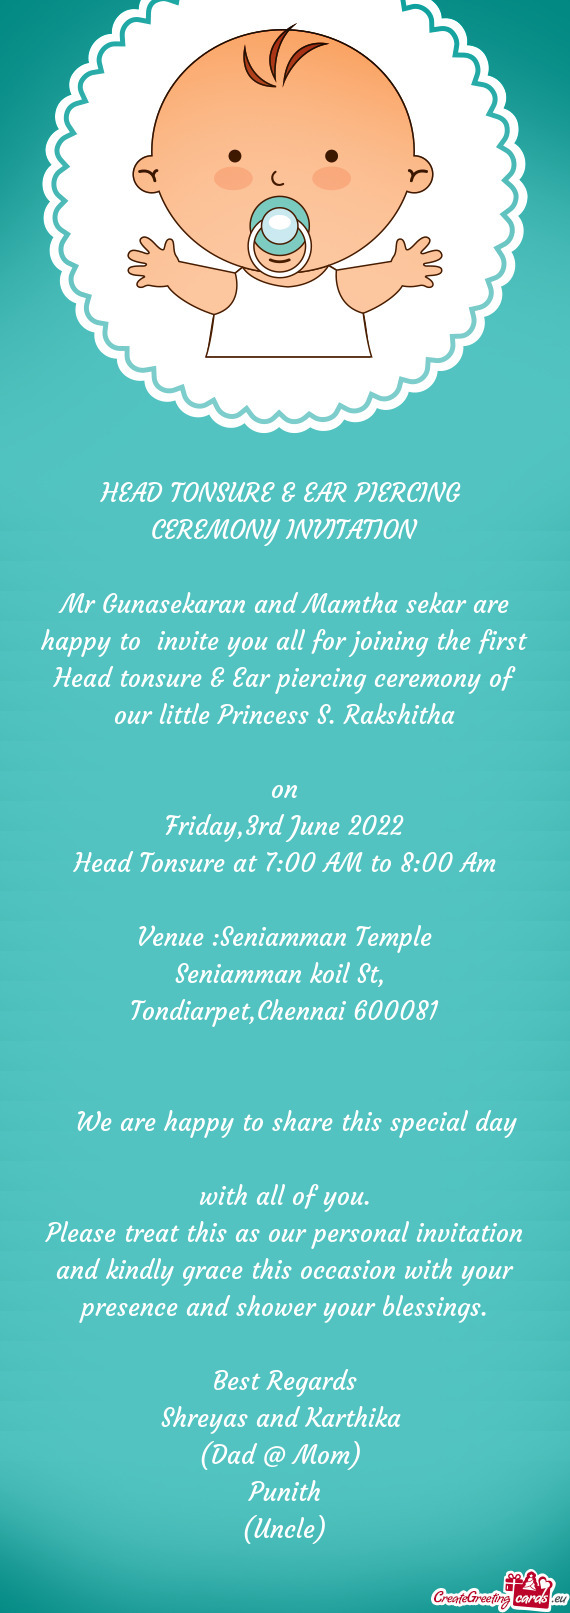 Mr Gunasekaran and Mamtha sekar are happy to invite you all for joining the first Head tonsure & Ea